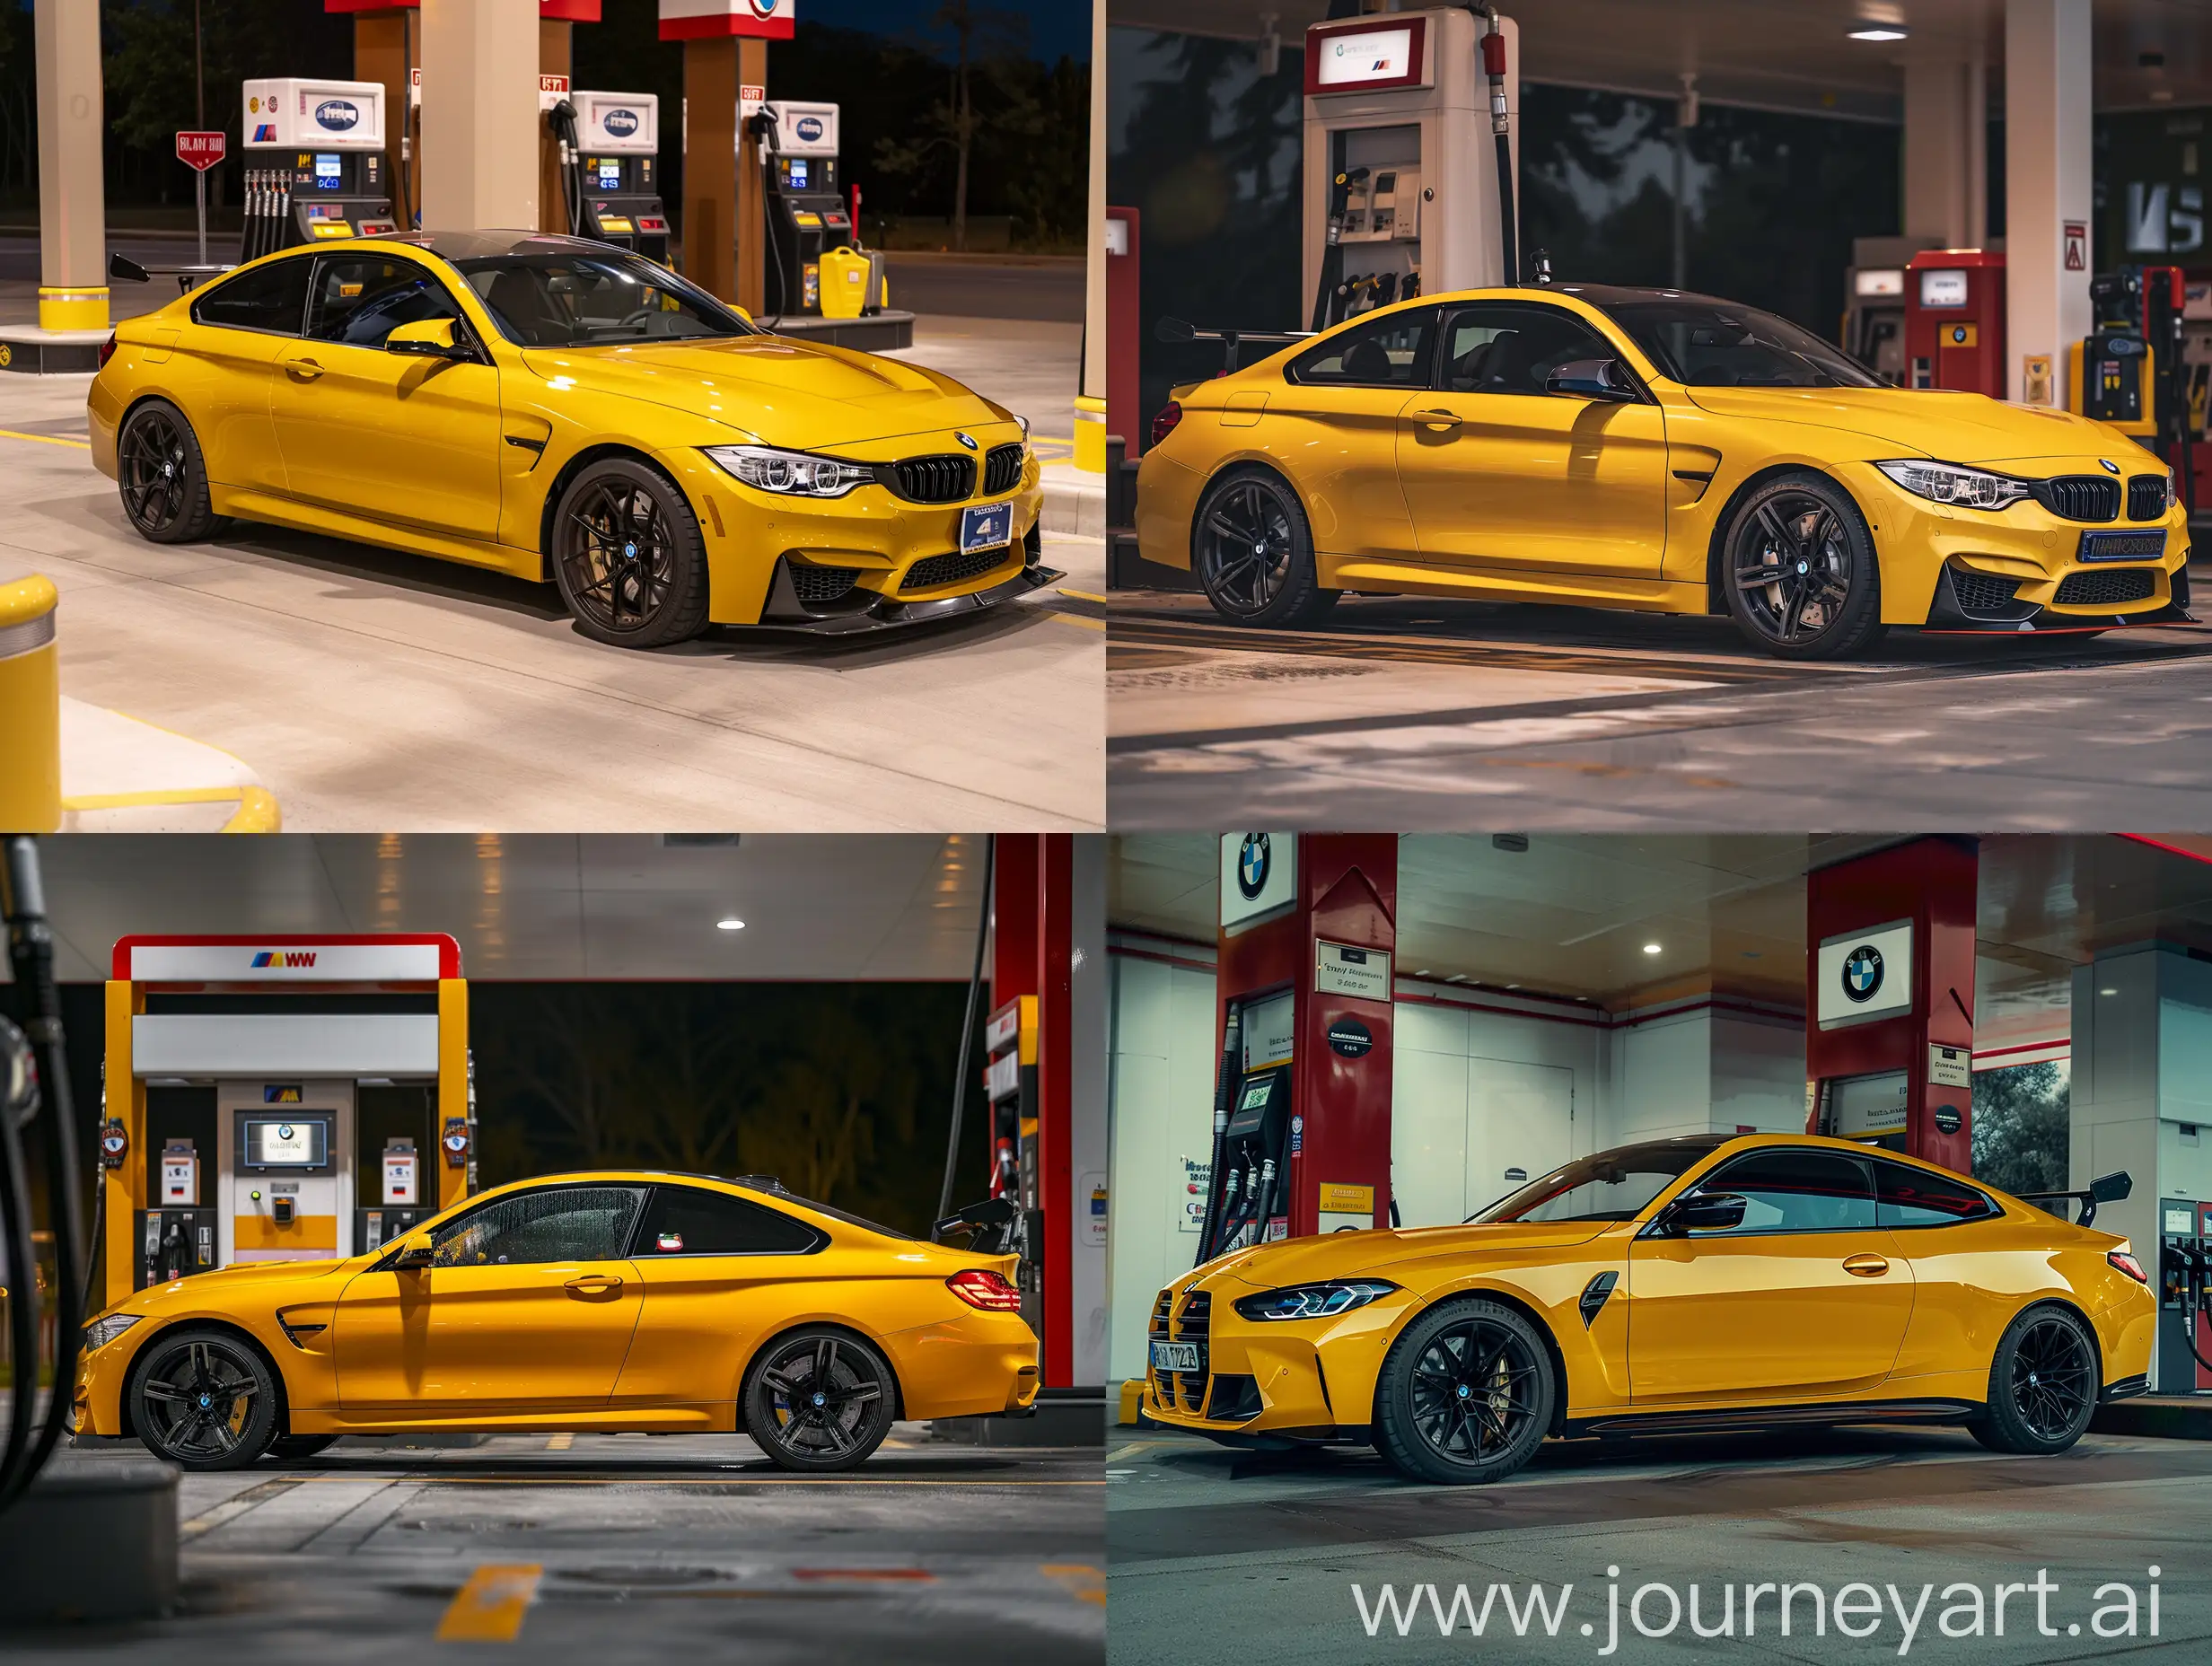 Yellow-BMW-M4-Parked-at-Gas-Station-Sleek-Sporty-Design-with-Black-Accents